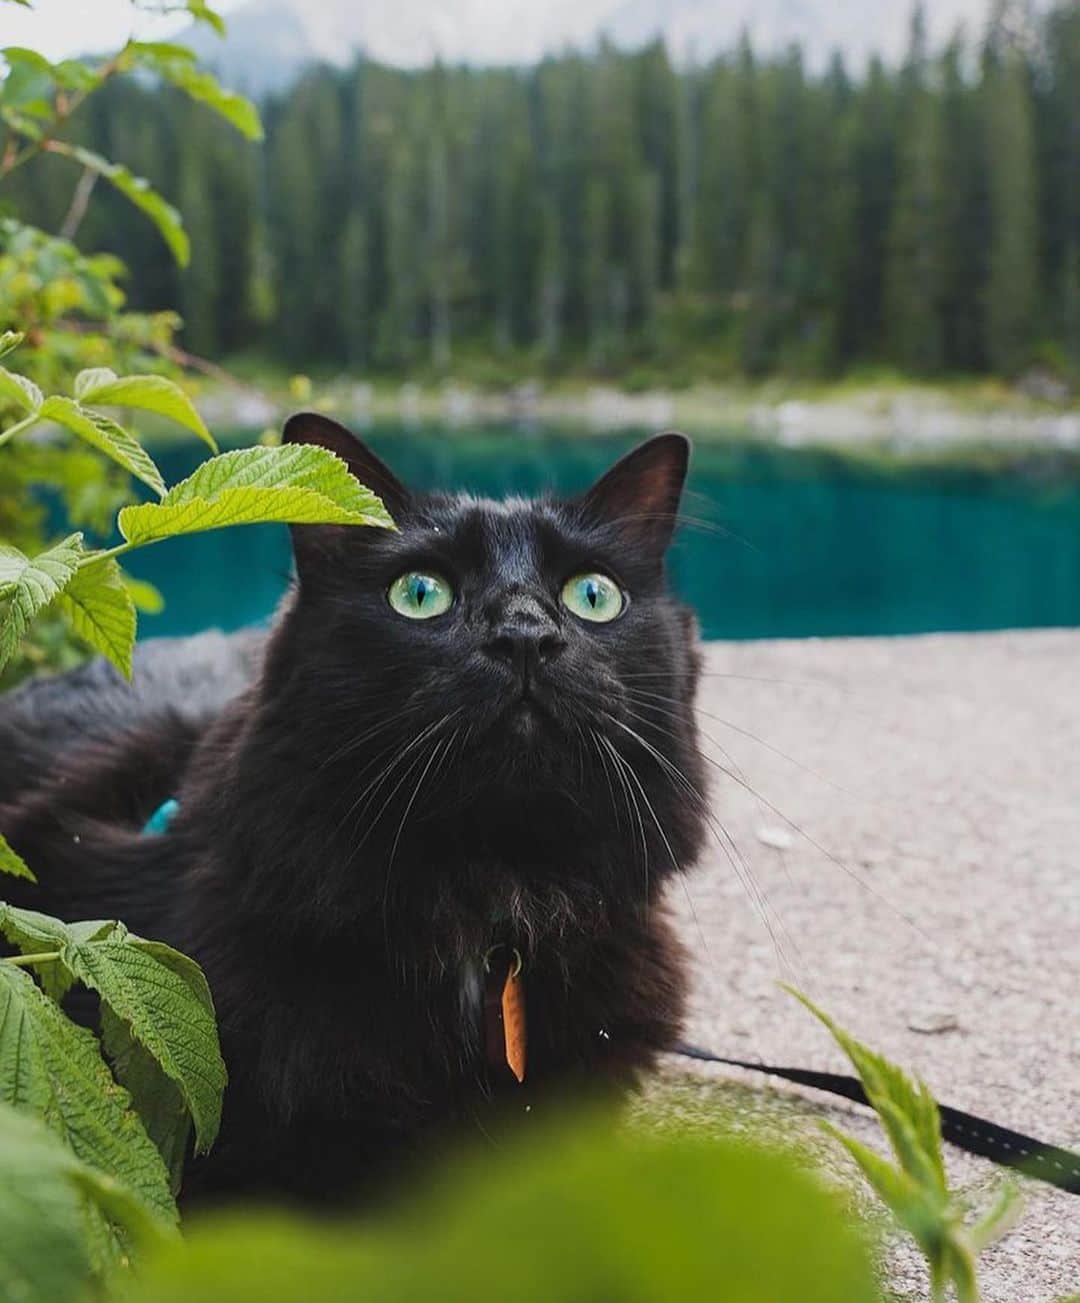 Bolt and Keelのインスタグラム：「Meet Aku! 🐈‍⬛ He is one curious kitty on his catventures 👀  @adventrapets ➡️ @akuthekitten  —————————————————— Follow @adventrapets to meet cute, brave and inspiring adventure pets from all over the world! 🌲🐶🐱🌲  • TAG US IN YOUR POSTS to get your little adventurer featured! #adventrapets ——————————————————」